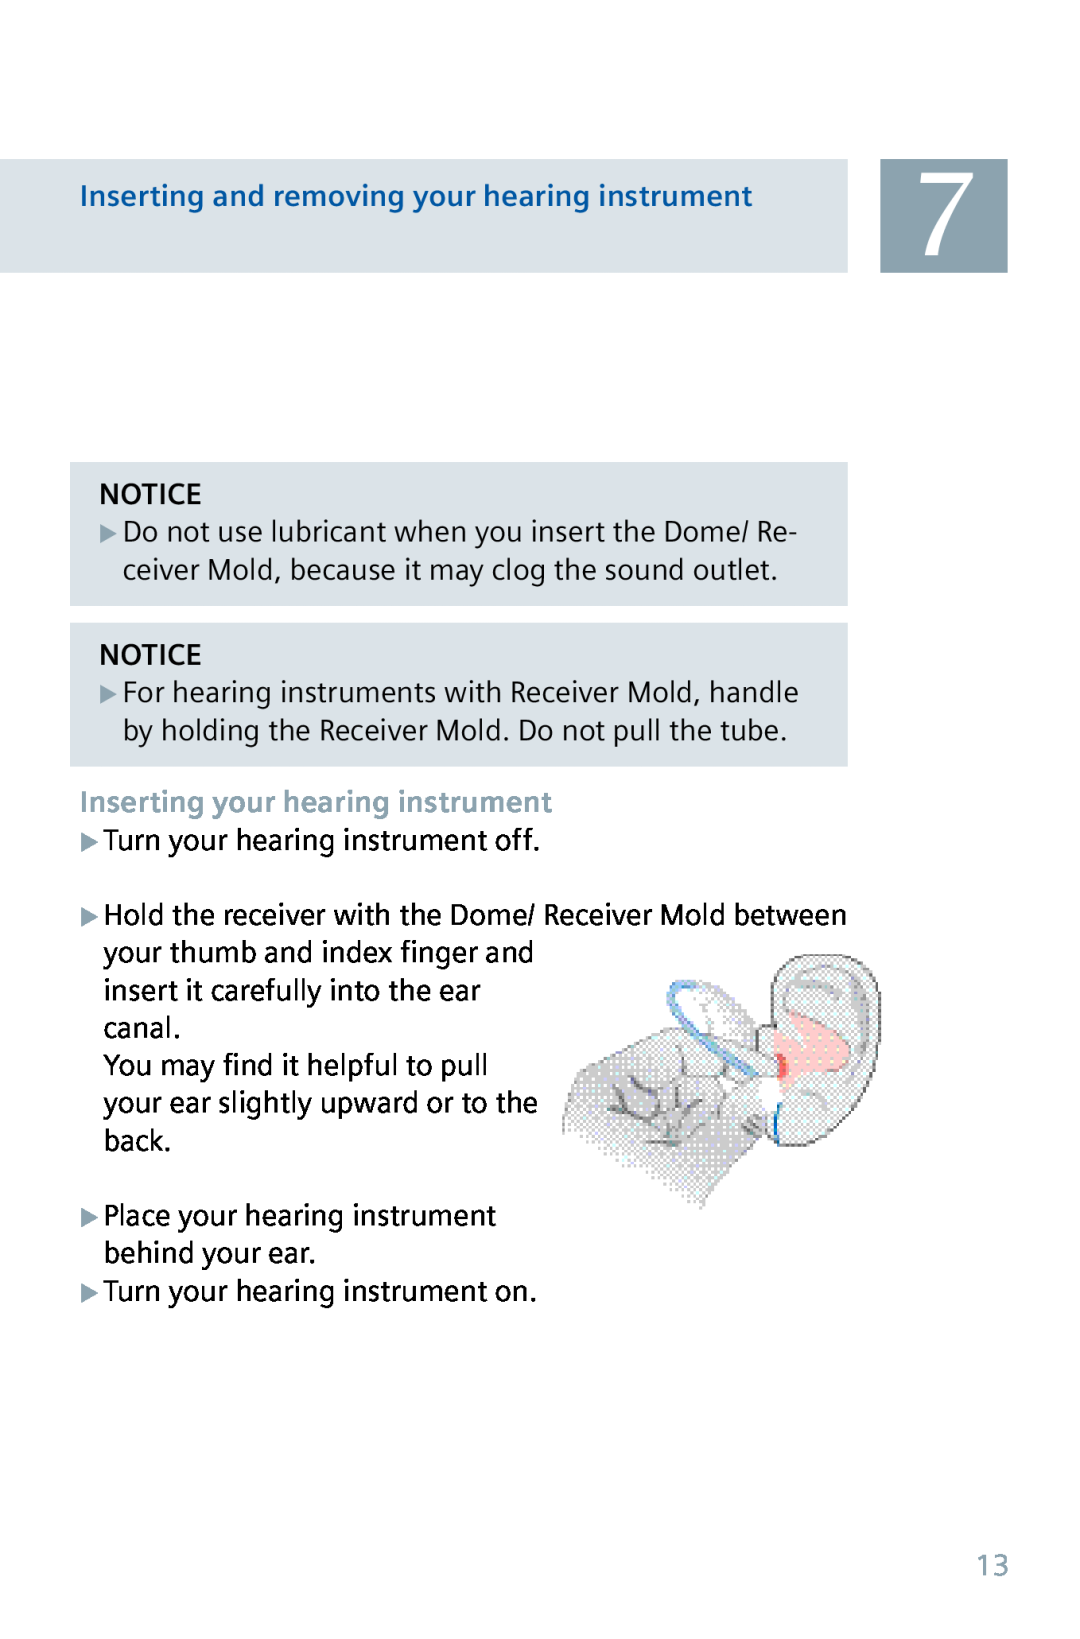 Siemens 700, 500 manual Inserting and removing your hearing instrument, Inserting your hearing instrument 